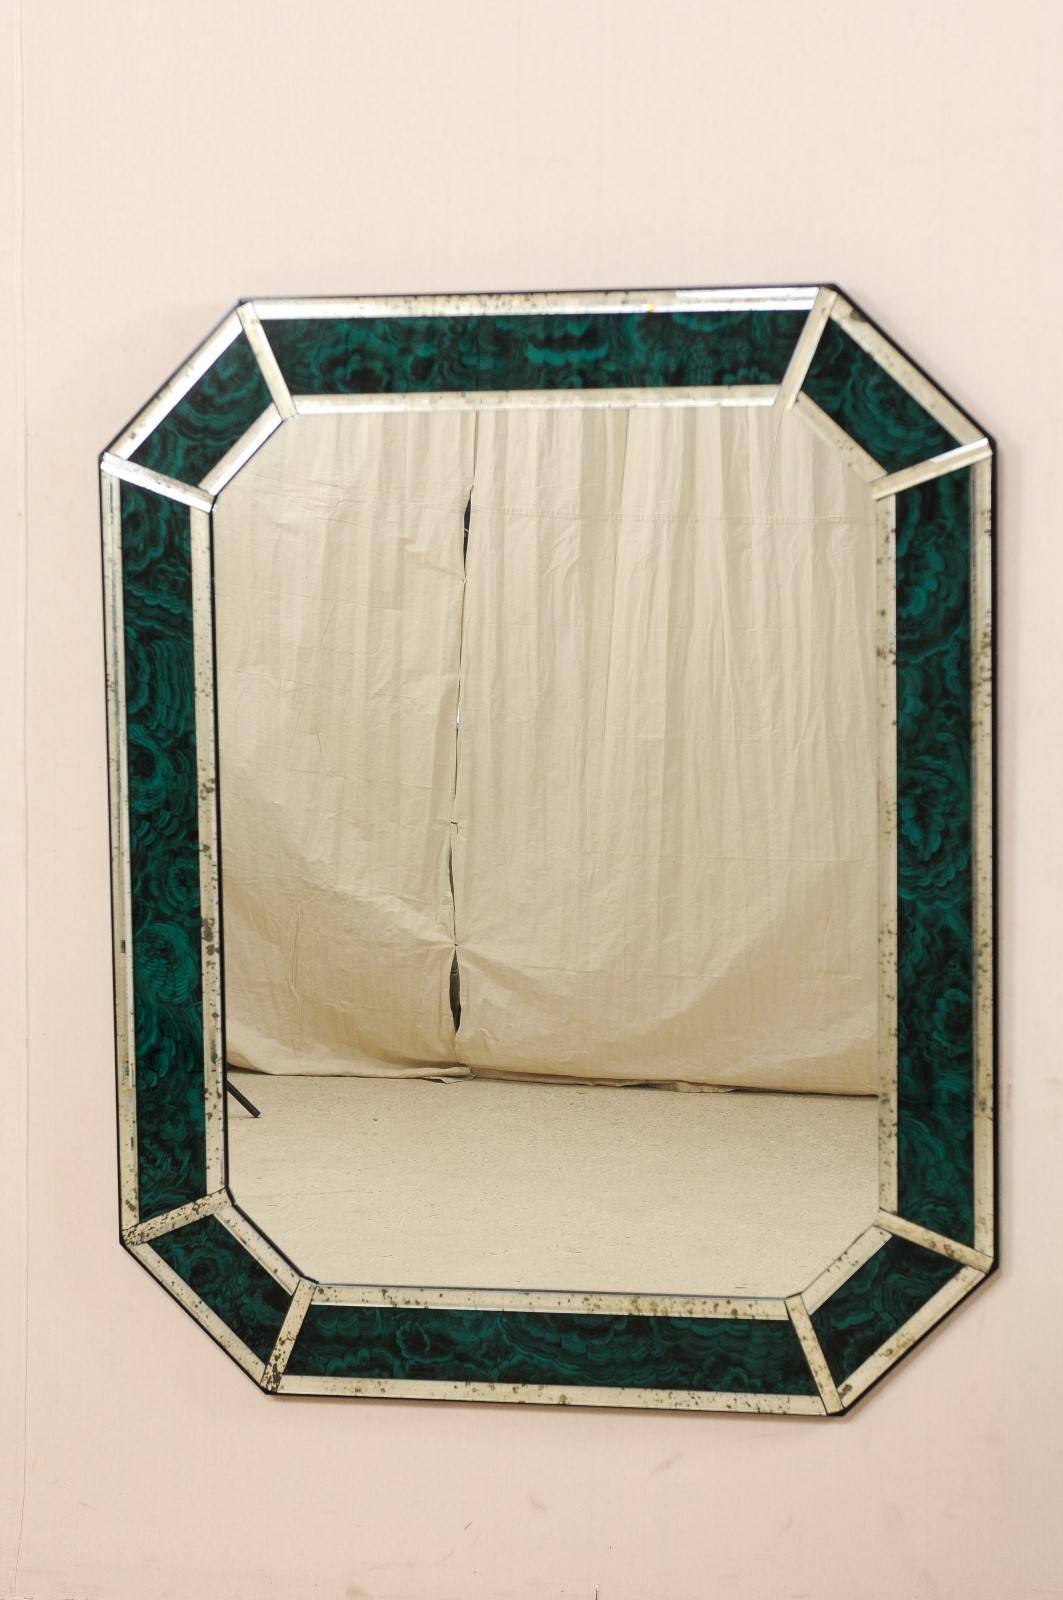 A large-sized, rectangular-octagon shaped mirror with accentuated malachite glass boarder. This American mirror features a clear center glass with a malachite glass surround, framed within antiqued glass sections. The malachite glass is a lovely